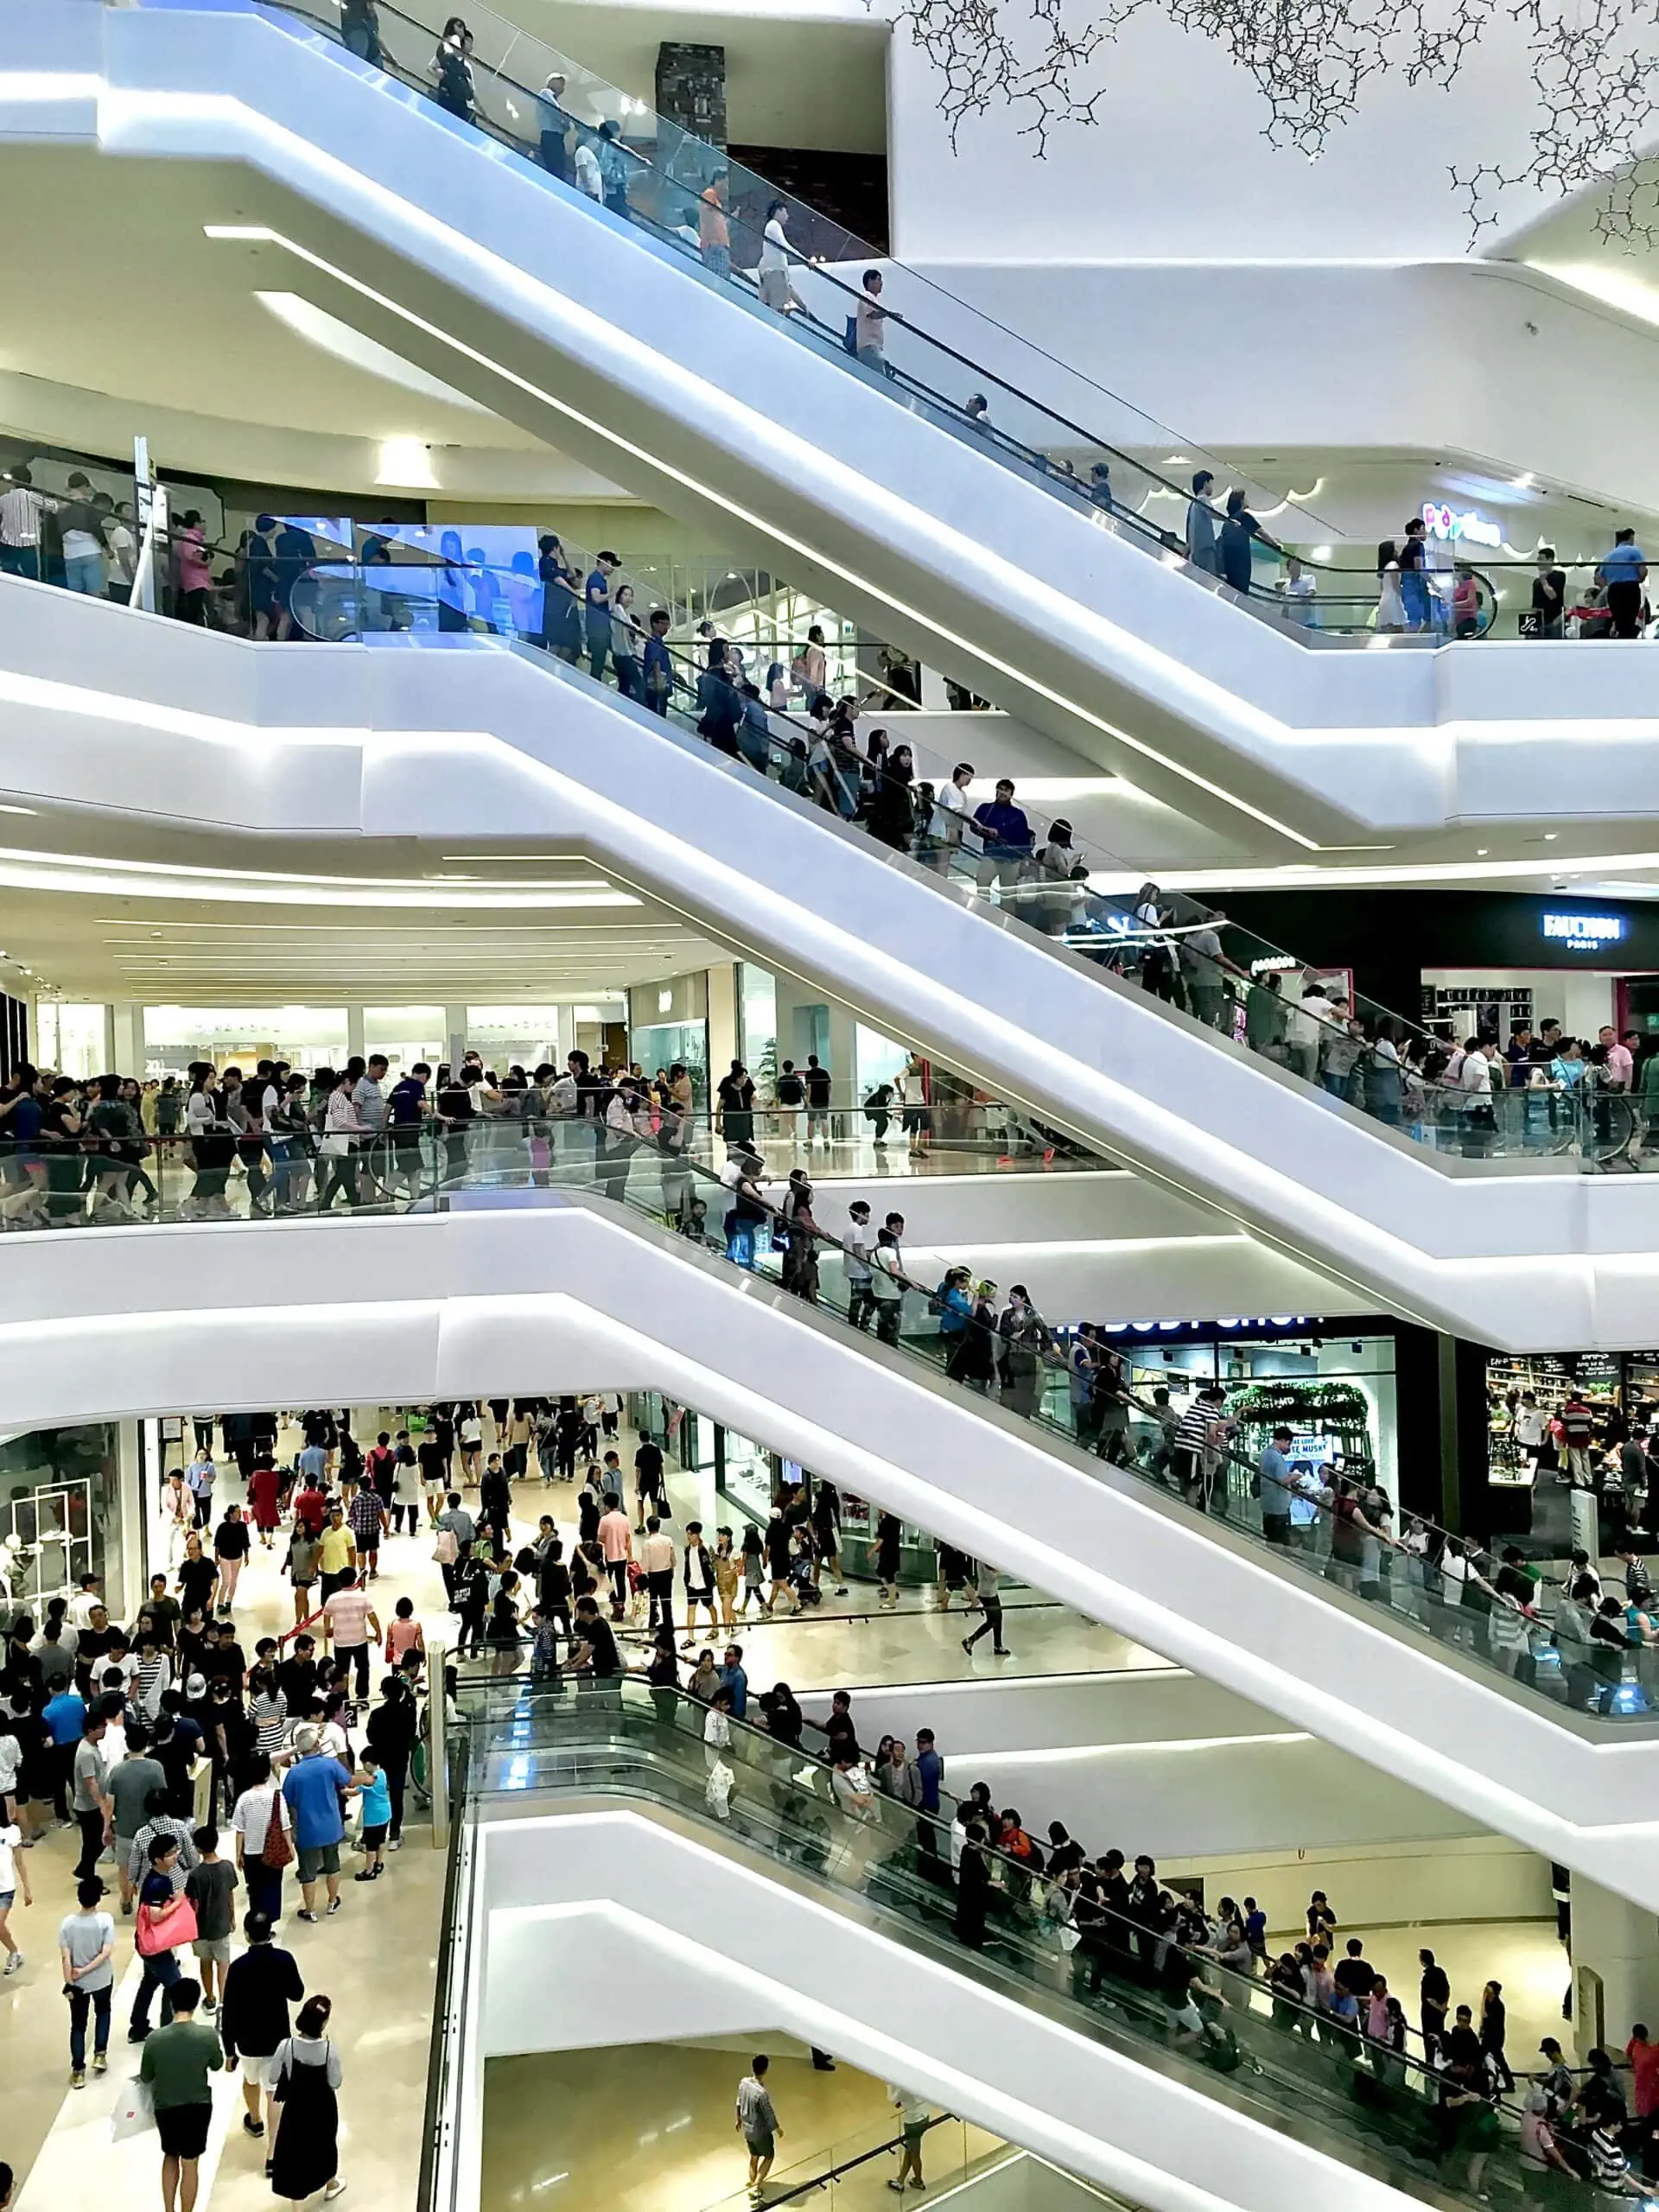 Busy 4-level mall staircase monitored by long distance security cameras